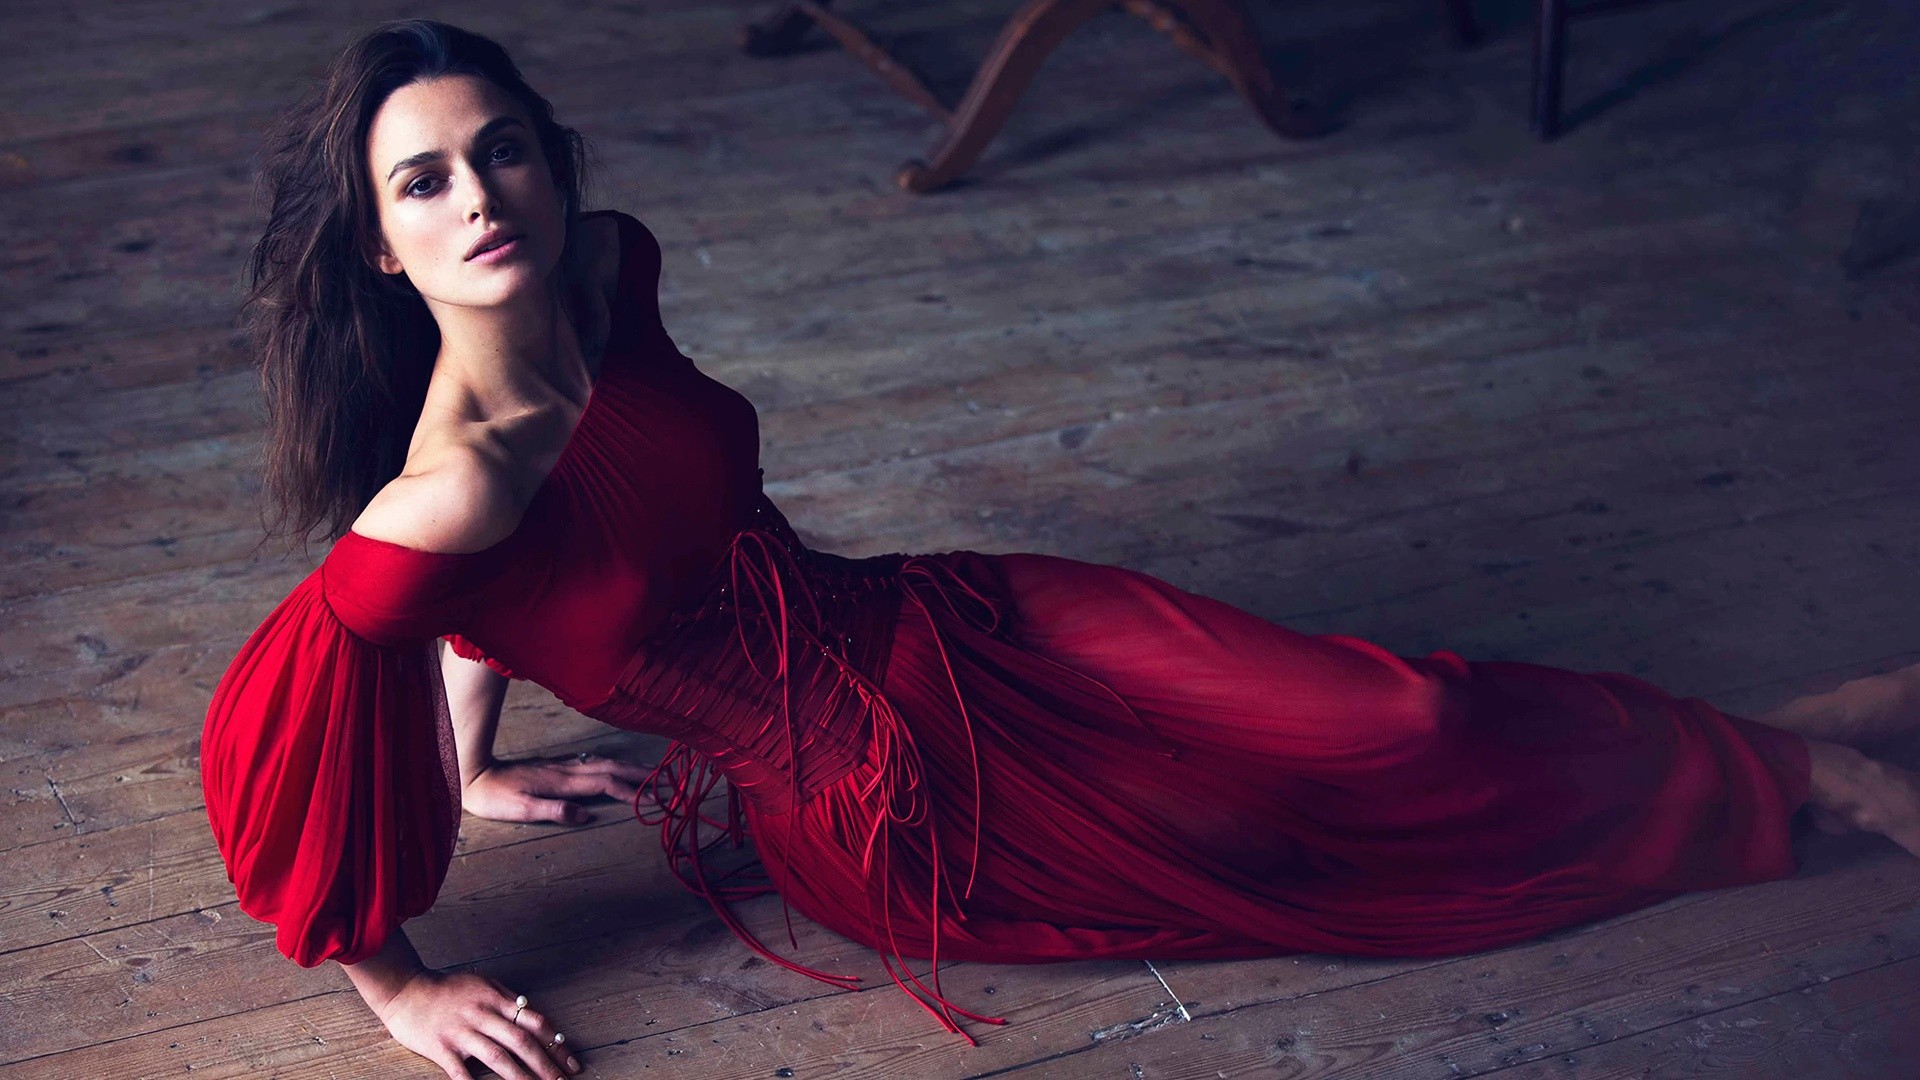 People 1920x1080 women dress wooden surface looking at viewer Keira Knightley corset women indoors actress red dress red clothing long hair brunette on the floor